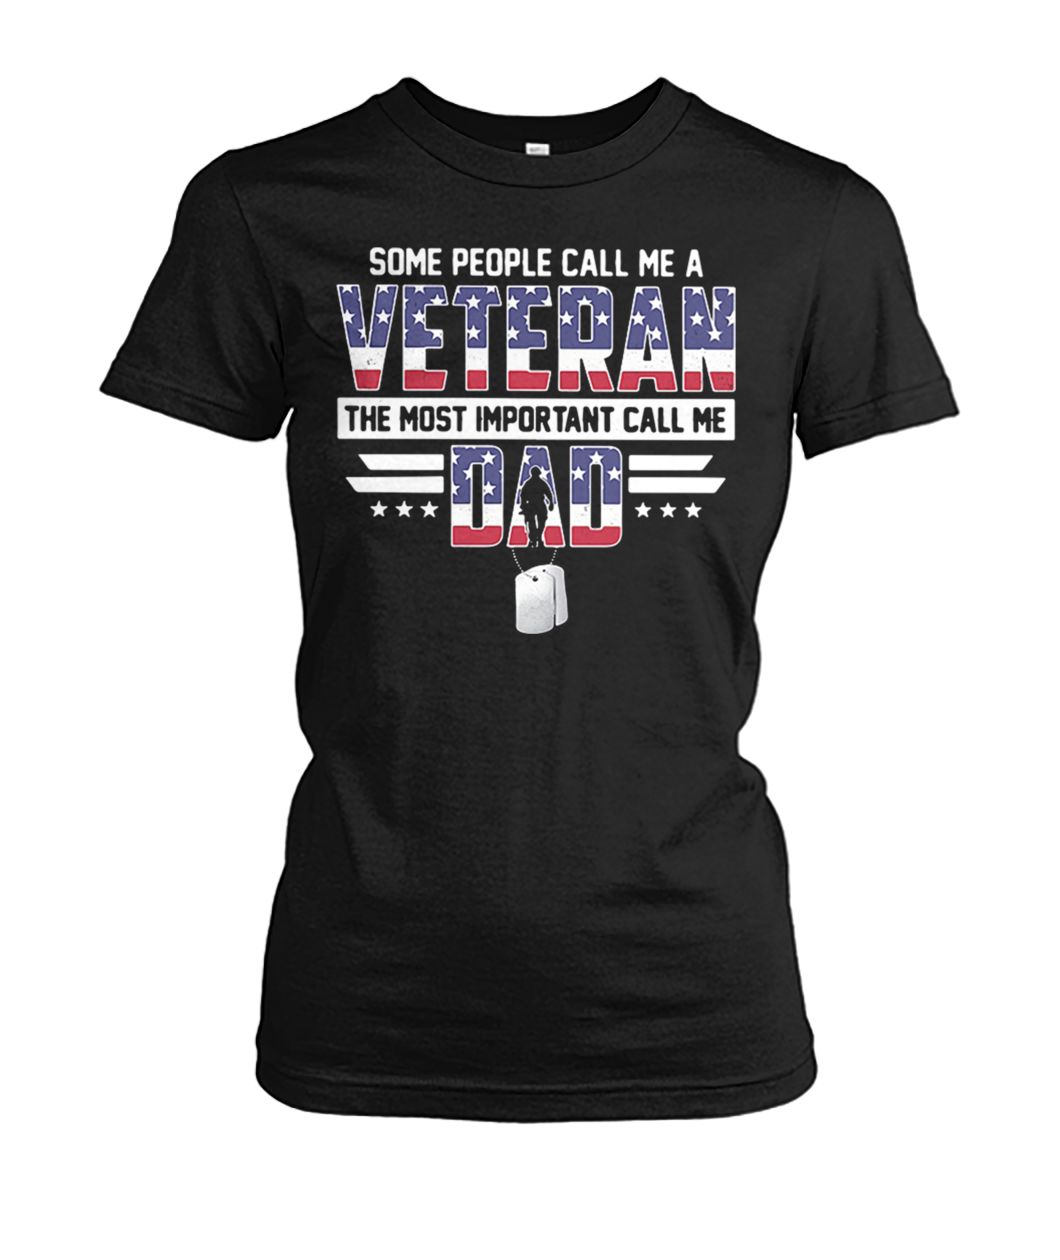 Some people call me a veteran the most important call me dad women's crew tee